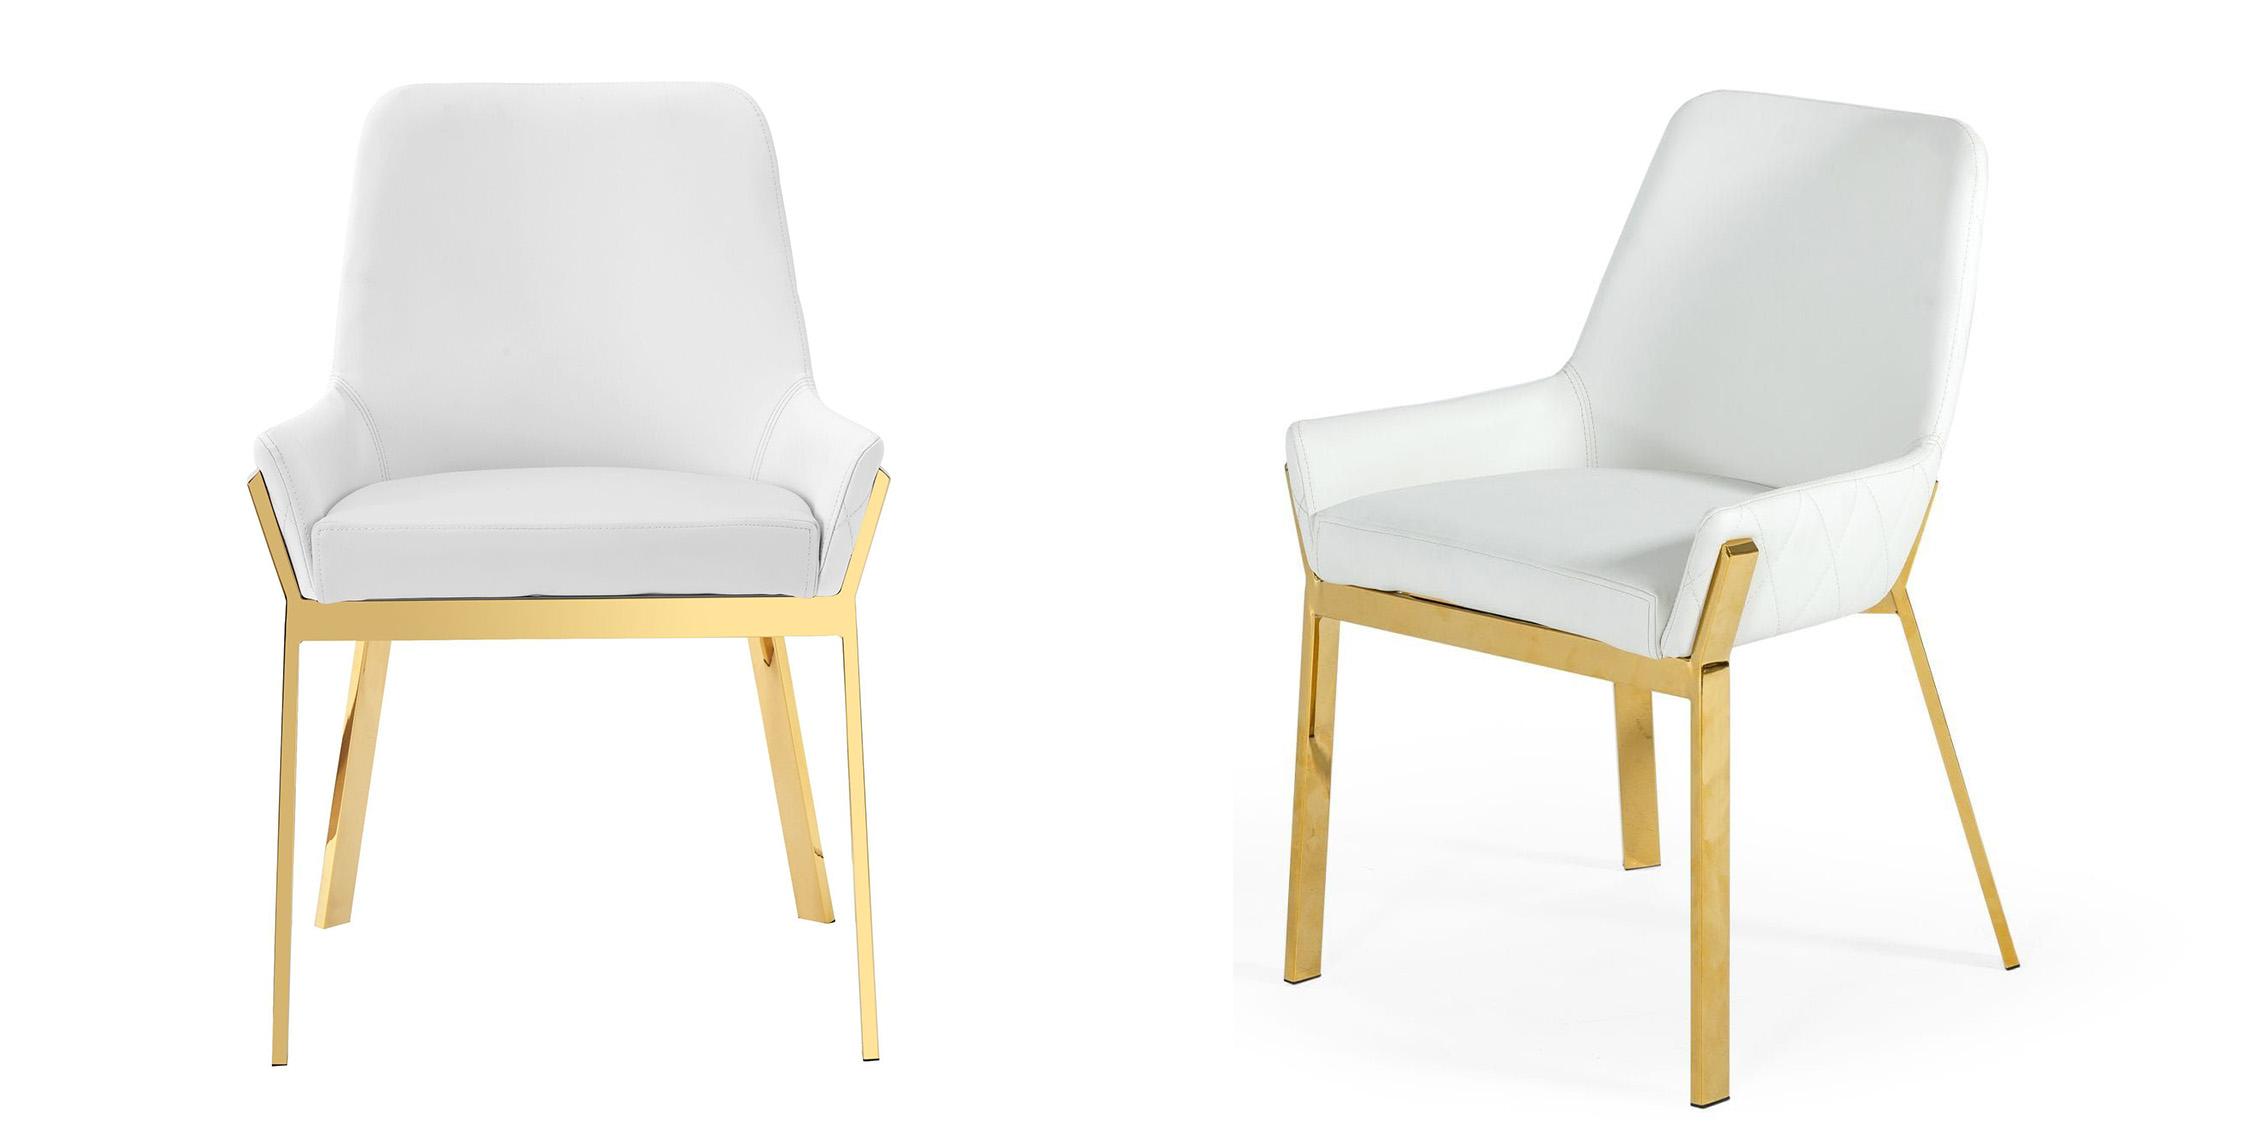 Contemporary, Modern Dining Chair Set VGGAGA-6736CH-WHT-GLD-DC-Set-2 VGGAGA-6736CH-WHT-GLD-DC-Set-2 in White, Gold Leatherette